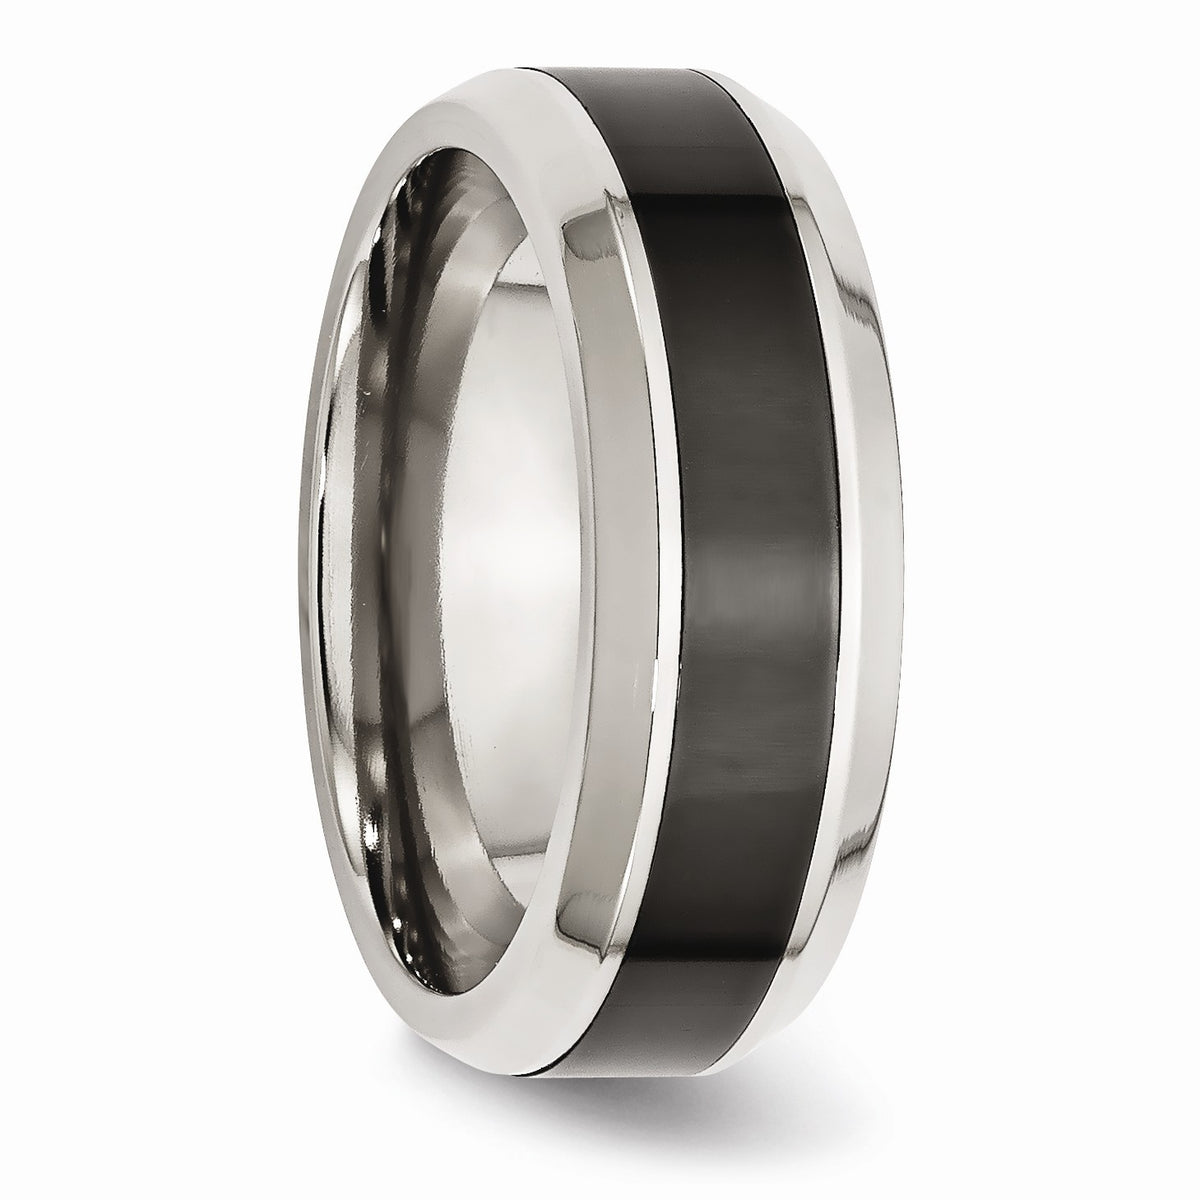 Alternate view of the 7.5mm Polished Stainless Steel and Black Ceramic Beveled Band by The Black Bow Jewelry Co.